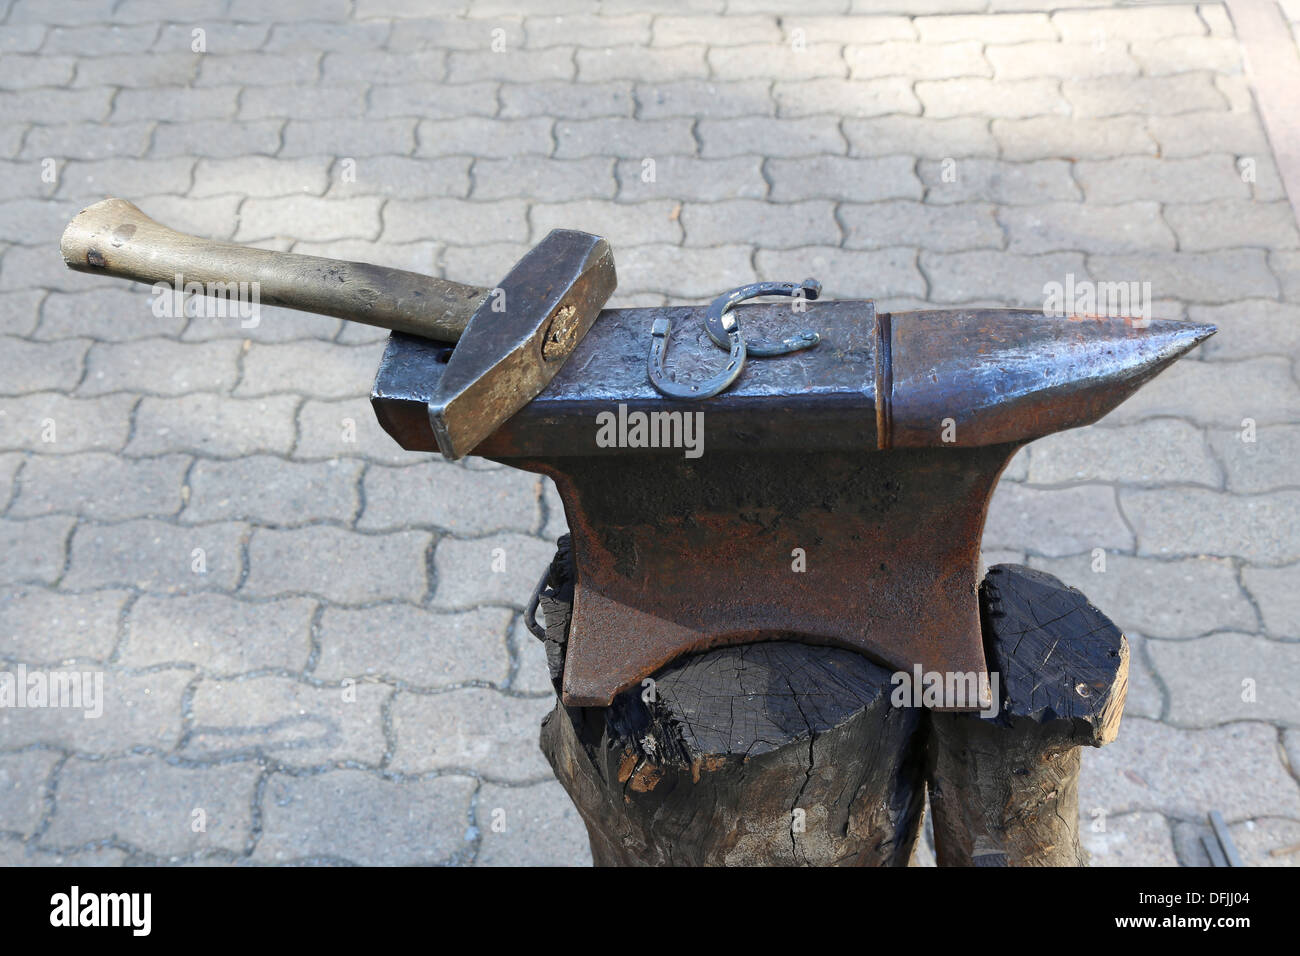 Anvil, hammer and a horseshoes Stock Photo